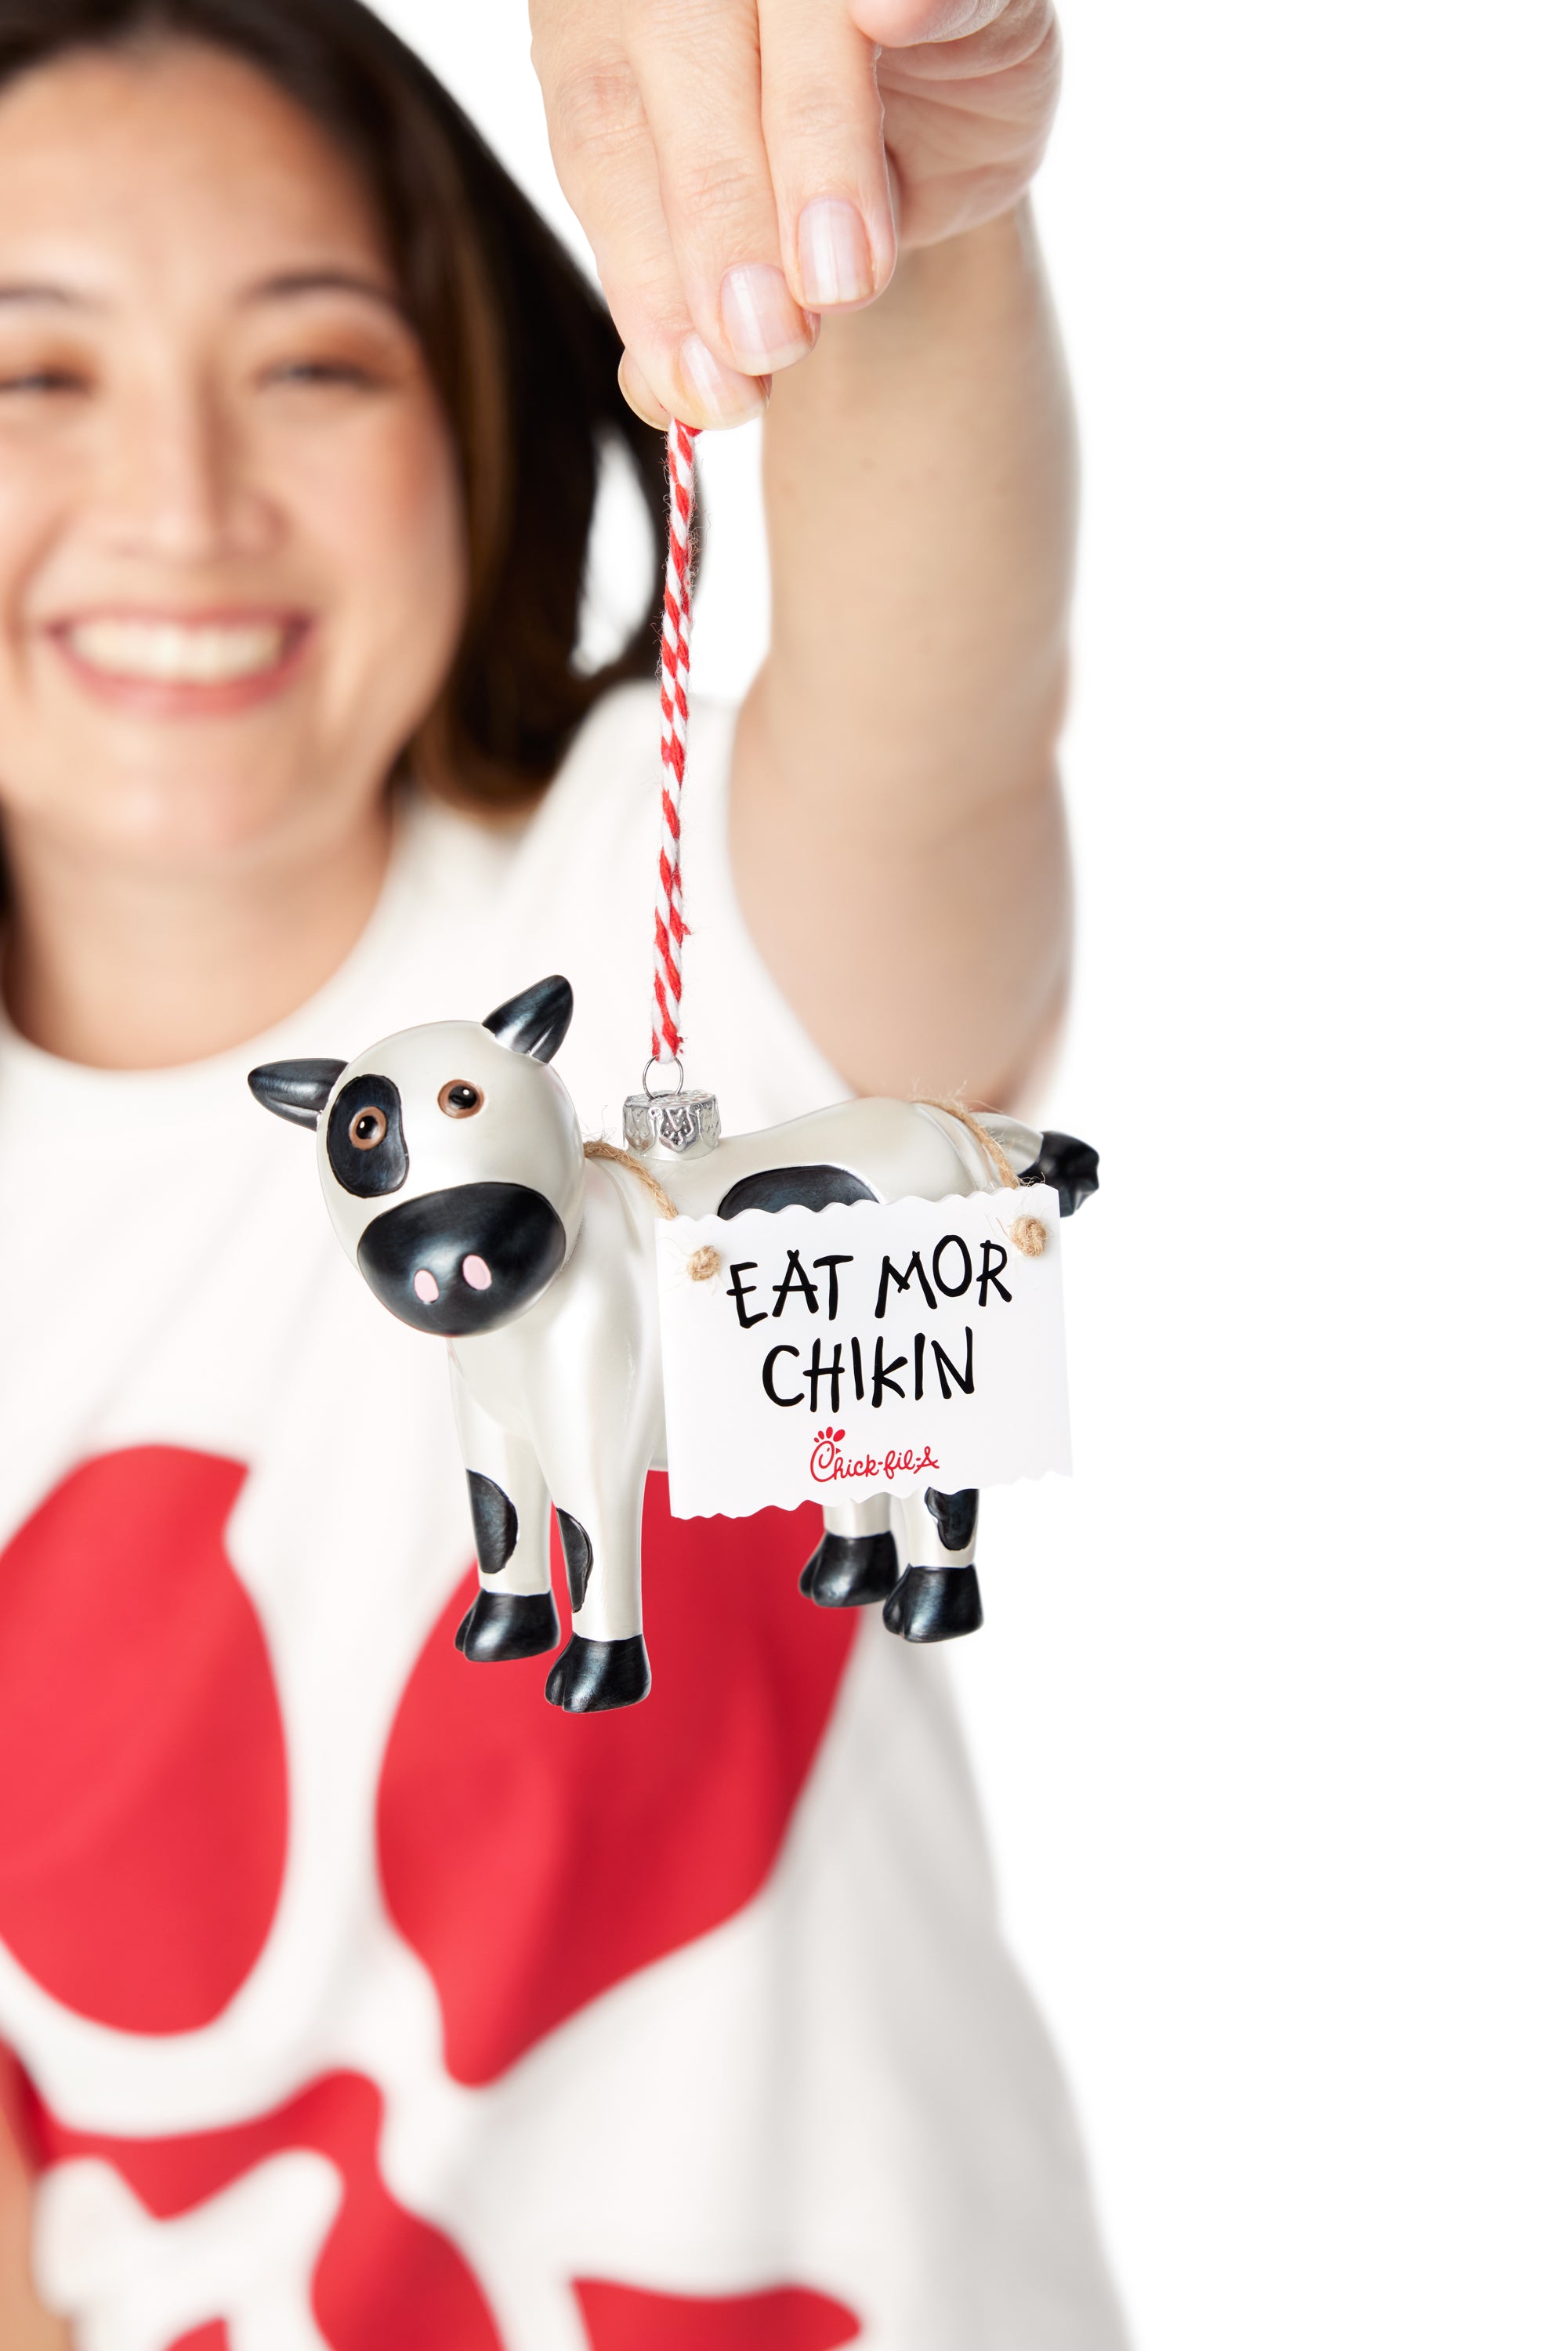 Woman in a Chick-fil-A Logo Print Tee holding a black and white cow ornament wearing a sign that says &quot;EAT MOR CHIKIN&quot;